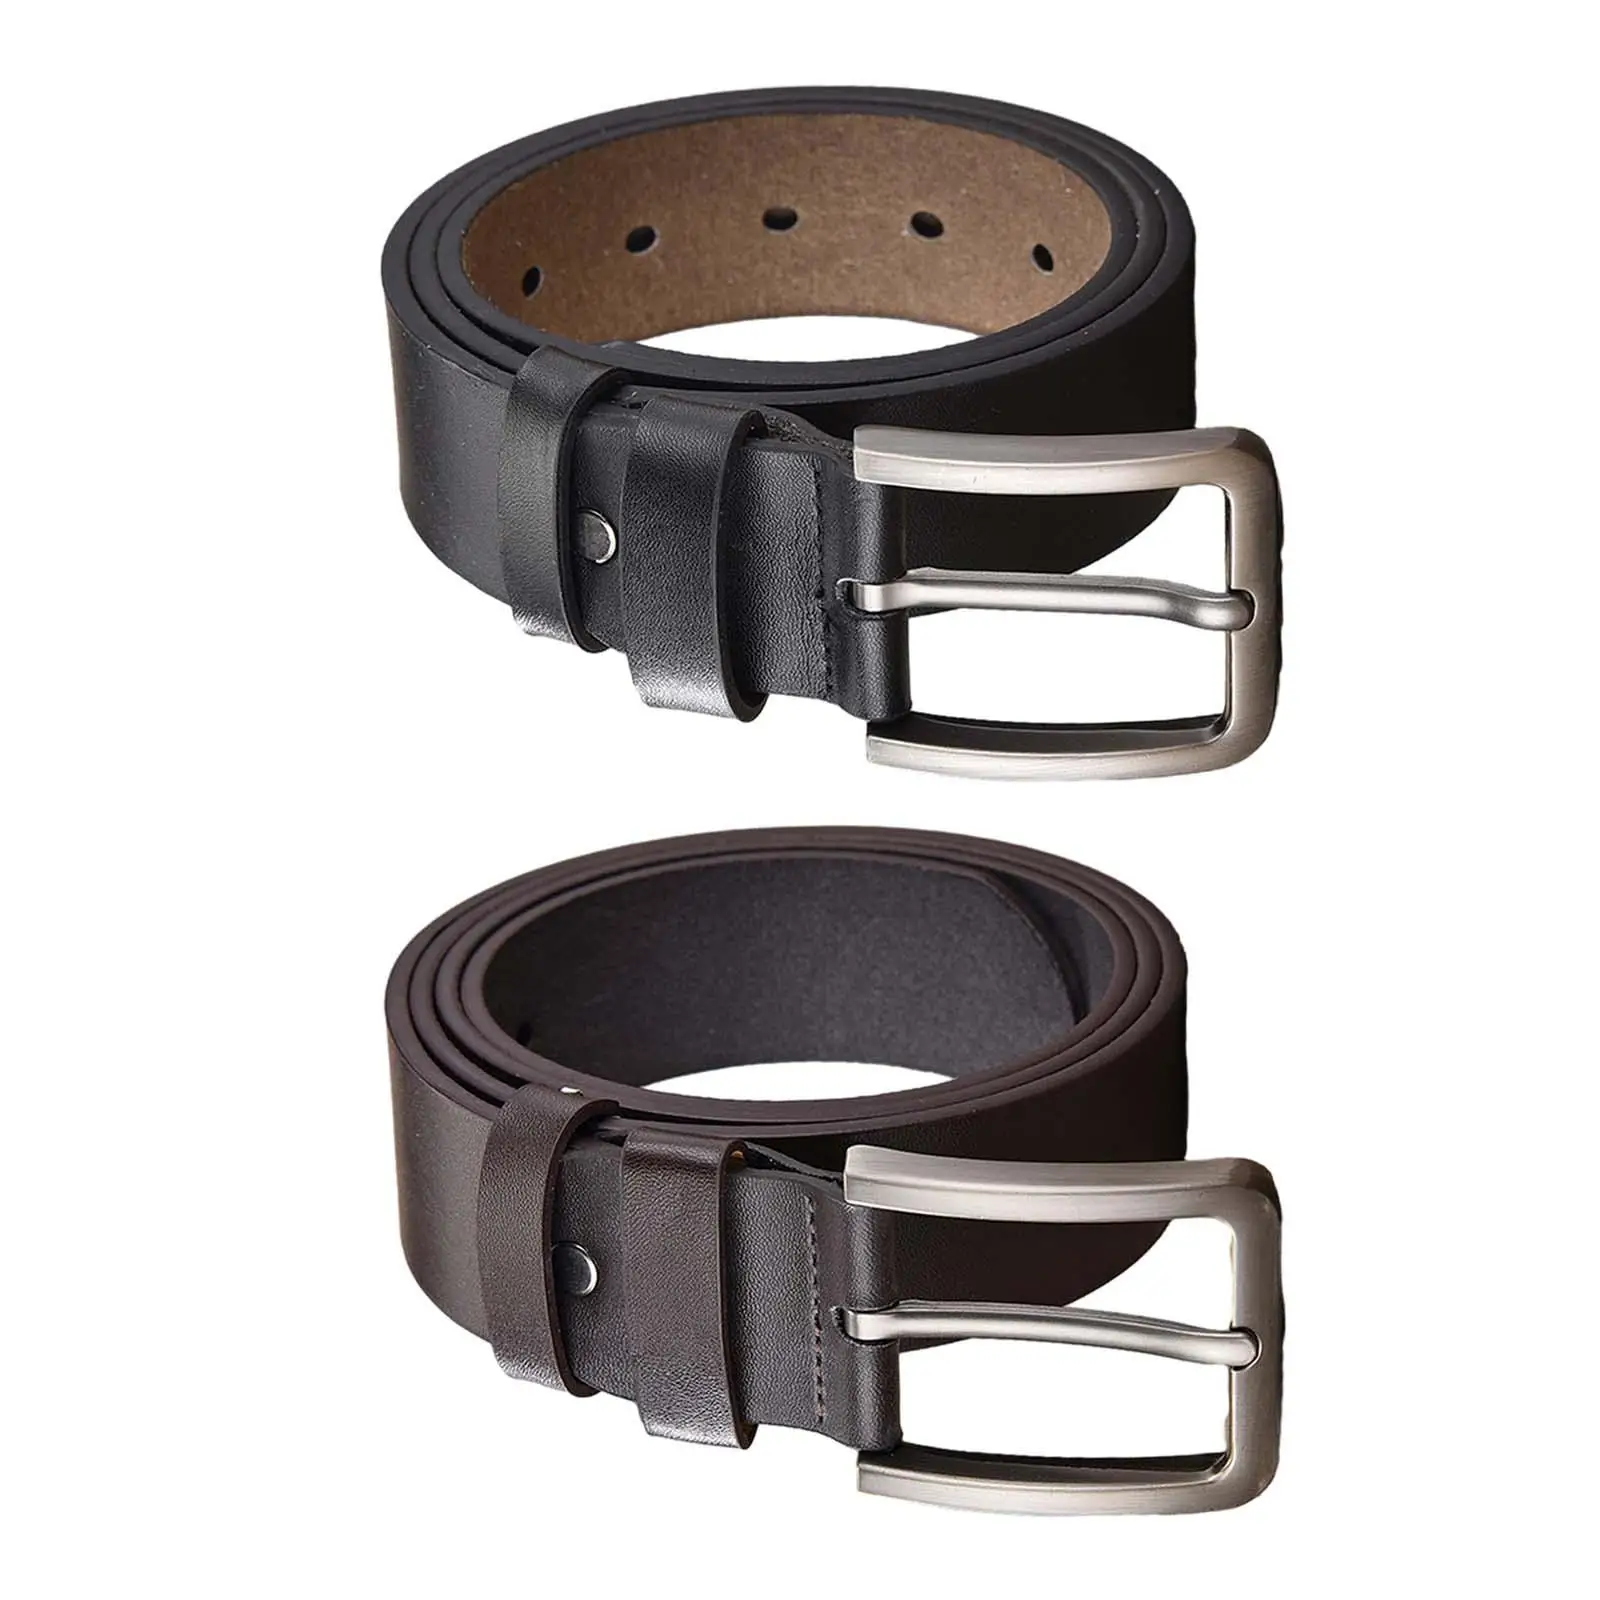 Men Belt Adjustable Pin Buckle Casual 47inch Long Waistband PU Leather Belt Waist Strap for Pants Jeans Wedding Outdoor Travel